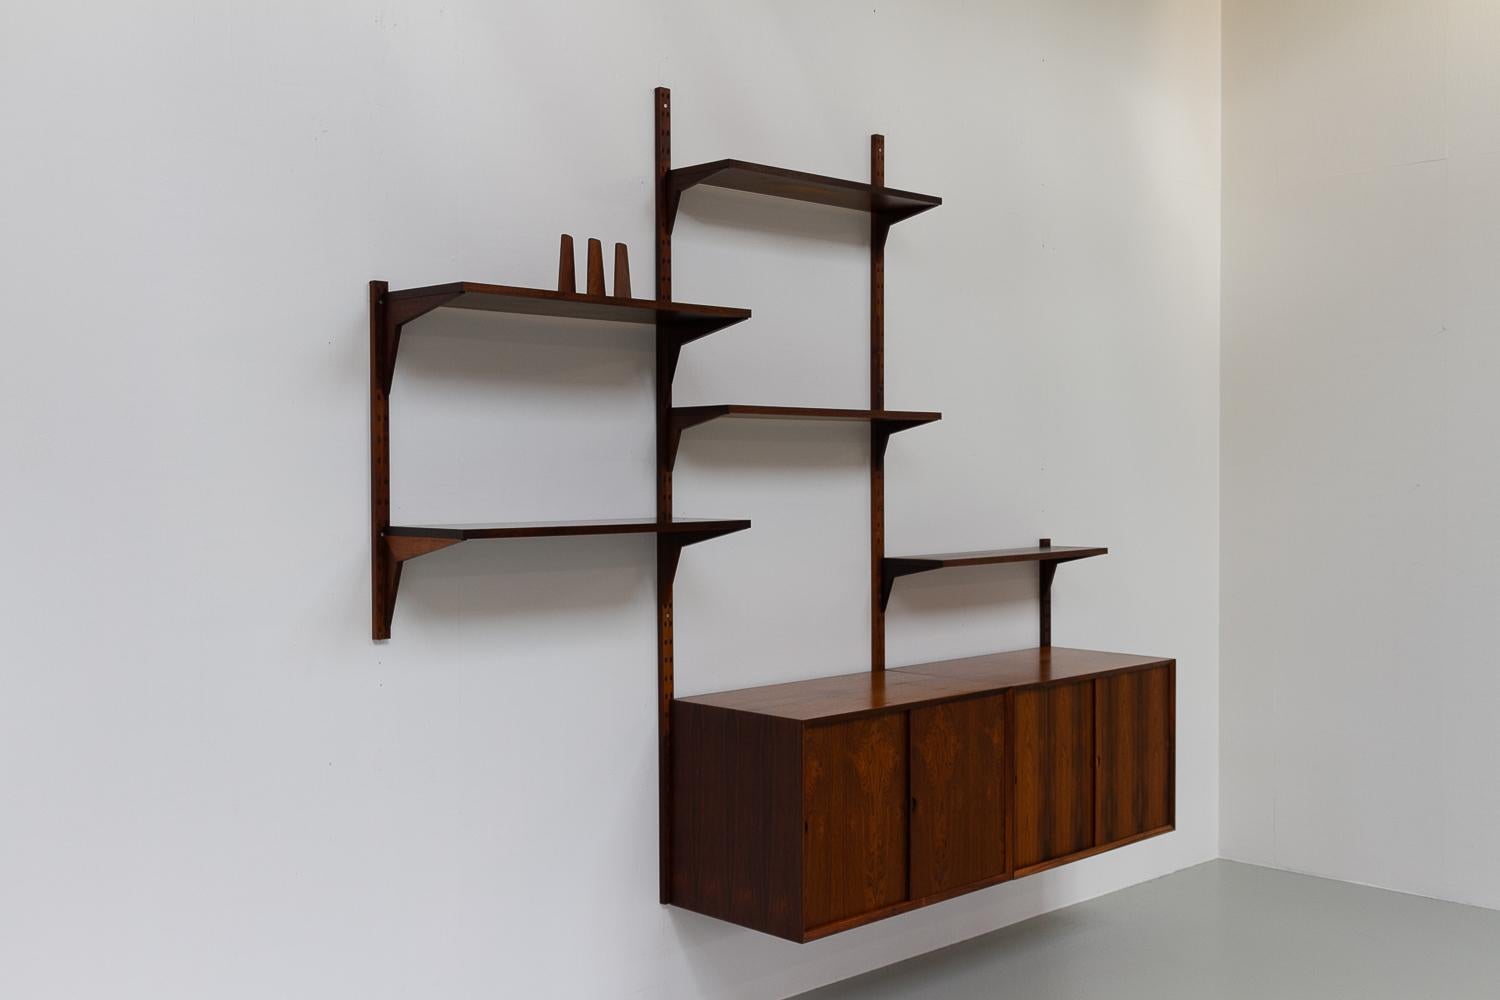 Vintage Danish rosewood modular wall unit by Poul Cadovius for Cado 1960s

Mid-Century Modern 3 bay shelving system model Cado. This is a original vintage floating bookcase designed by Danish architect Poul Cadovius. 
Cadovius had the revolutionary